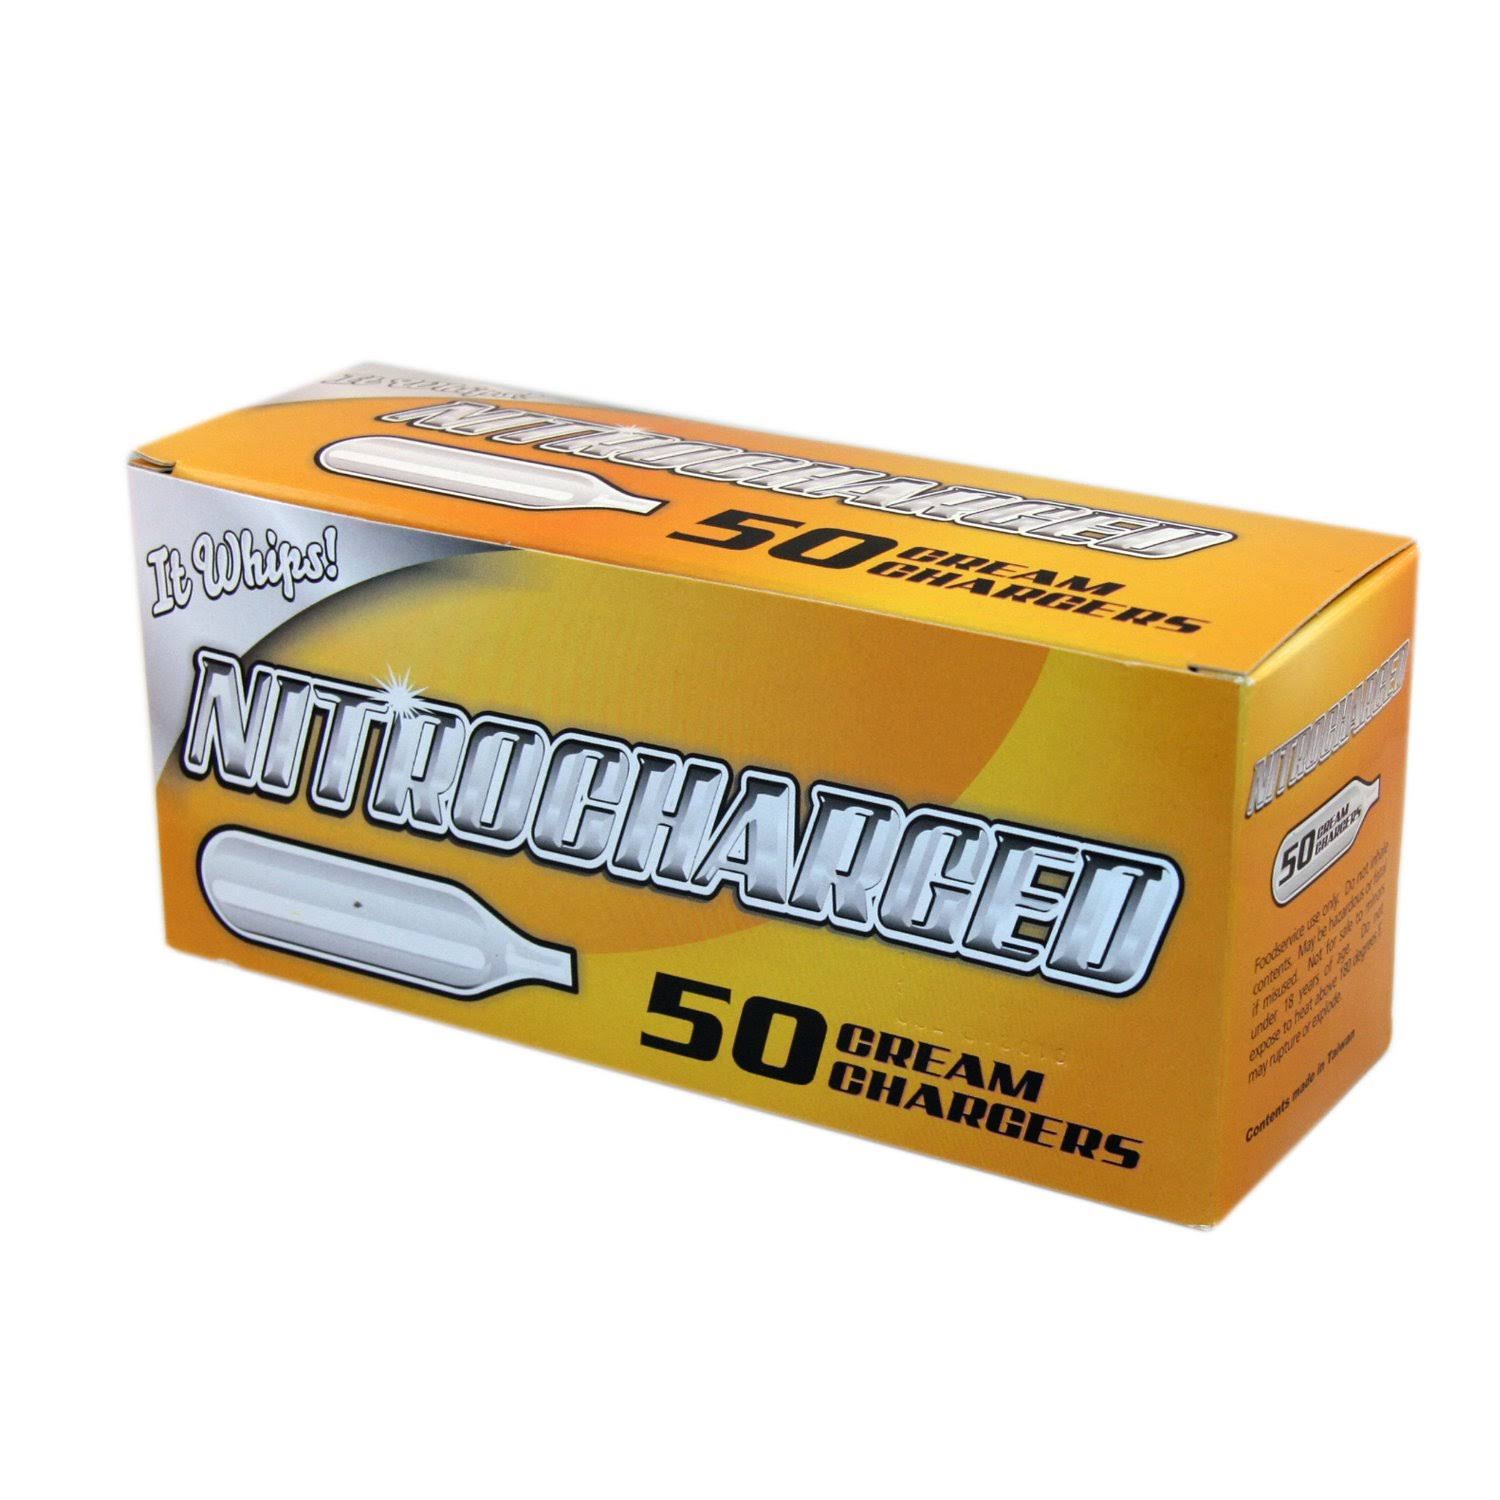 Nitro-50 Whip it N20 Nitrous Oxide Whipped Cream Chargers - 8.5g